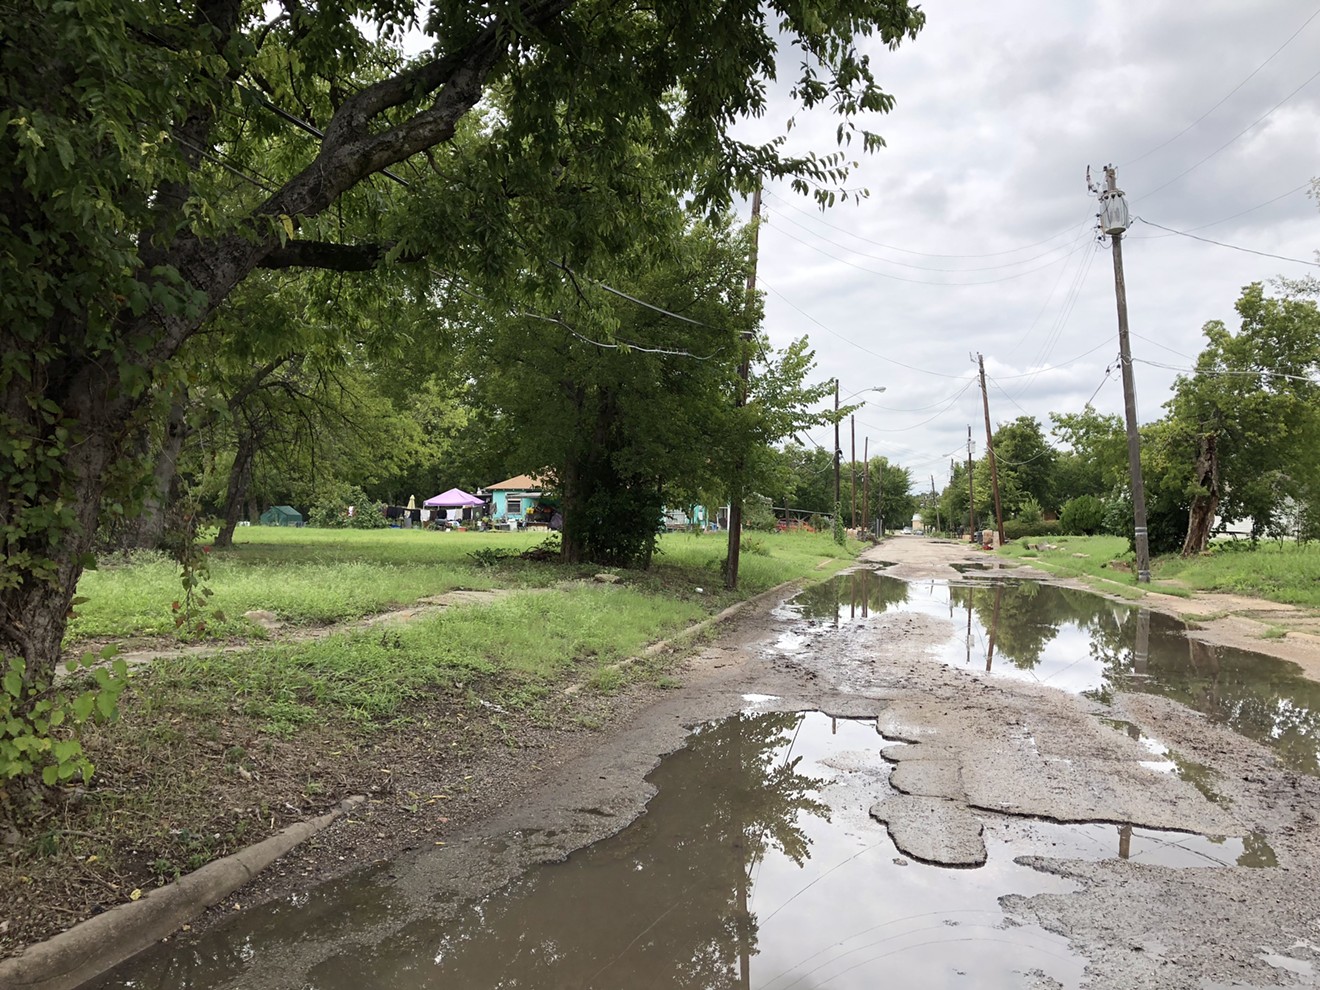 My wife and I were devastated — just devastated! — by the poverty and abandonment we found on a recent visit to Detroit. Oh, wait, sorry, wrong picture. This is Fleetwood Street, two miles southeast of my home in Dallas, right behind the State Fair of Texas.